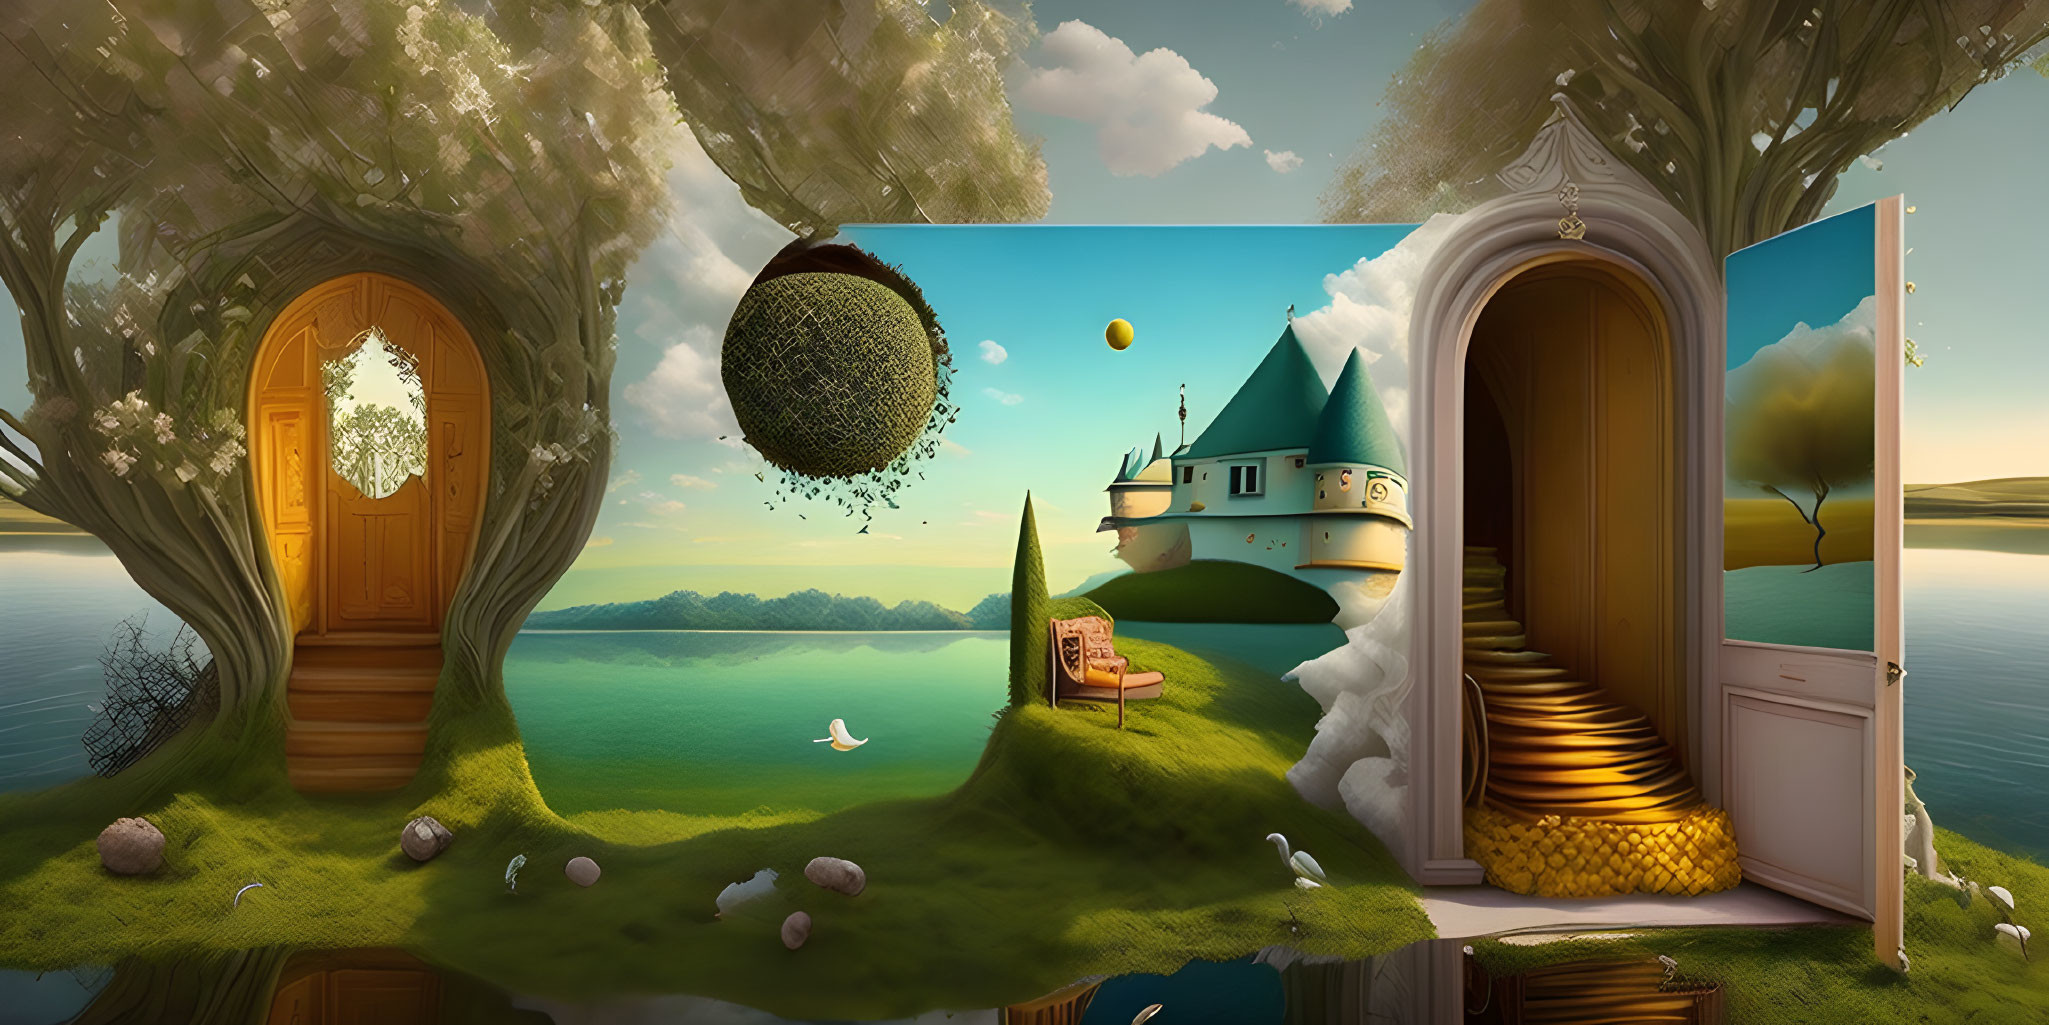 Surreal landscape with two tree doorways: castle on a cloud and lakeside view